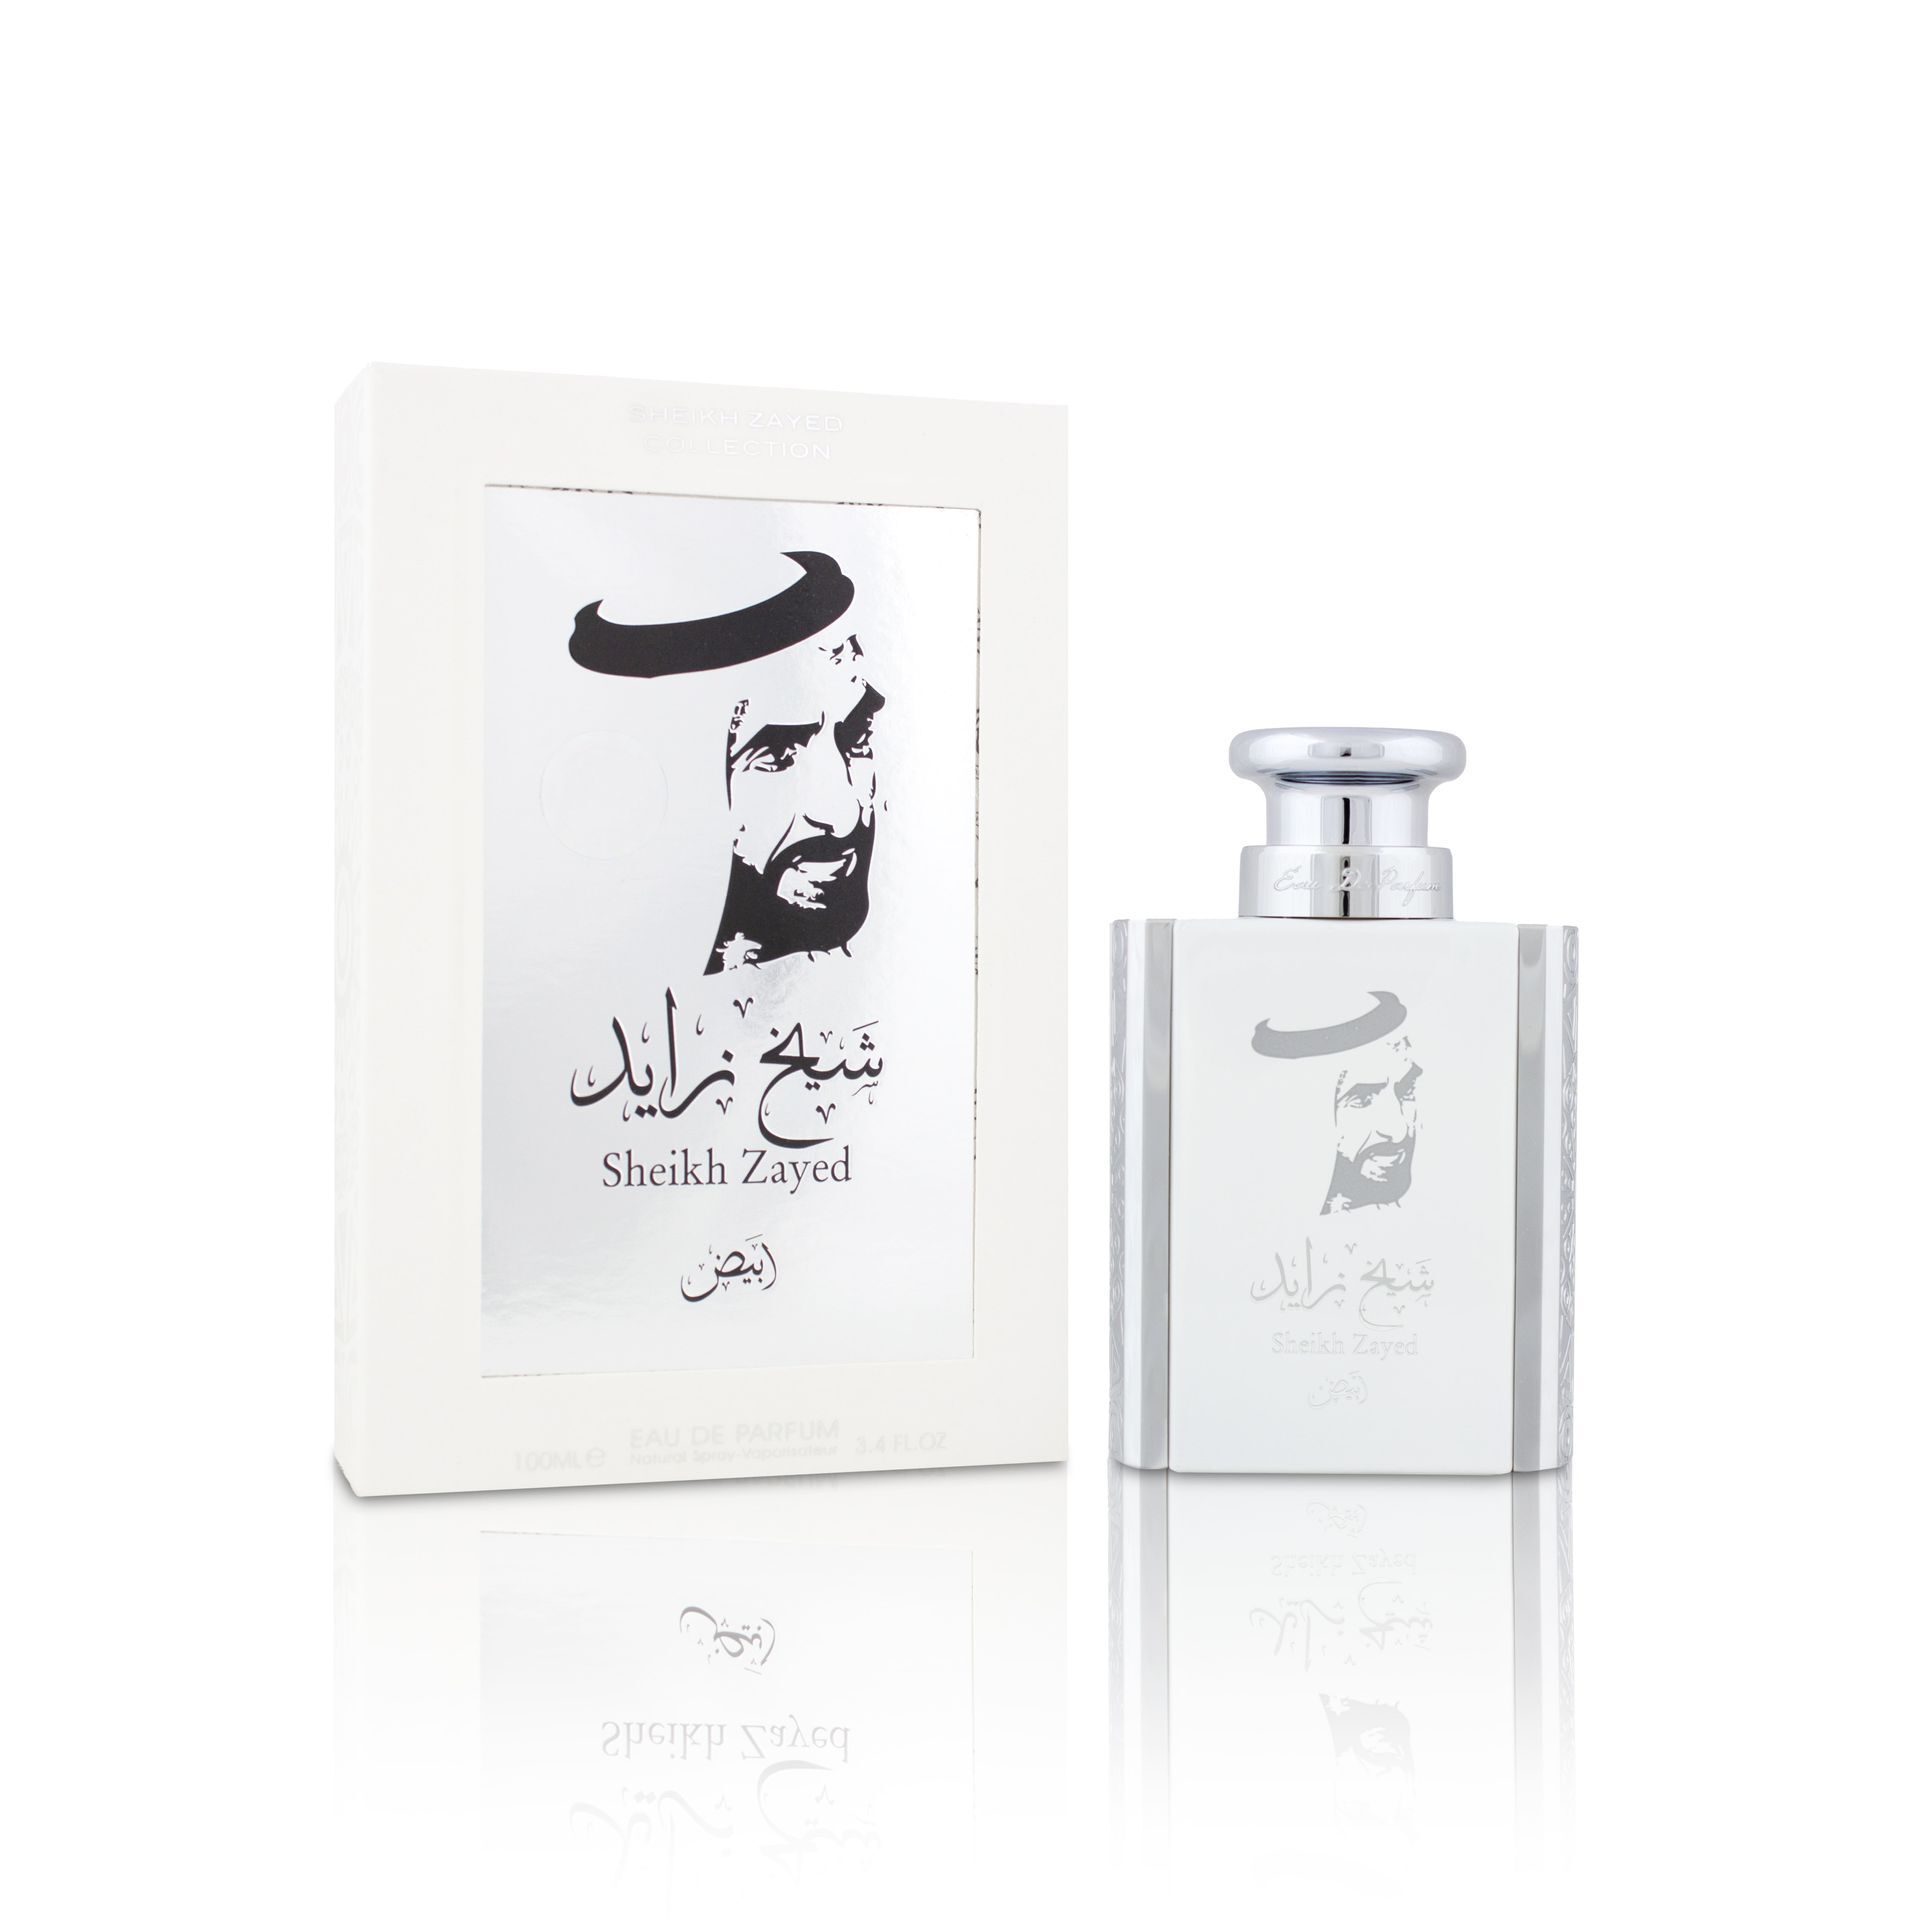 Sheikh Zayed white- Ajial Collection 100ml